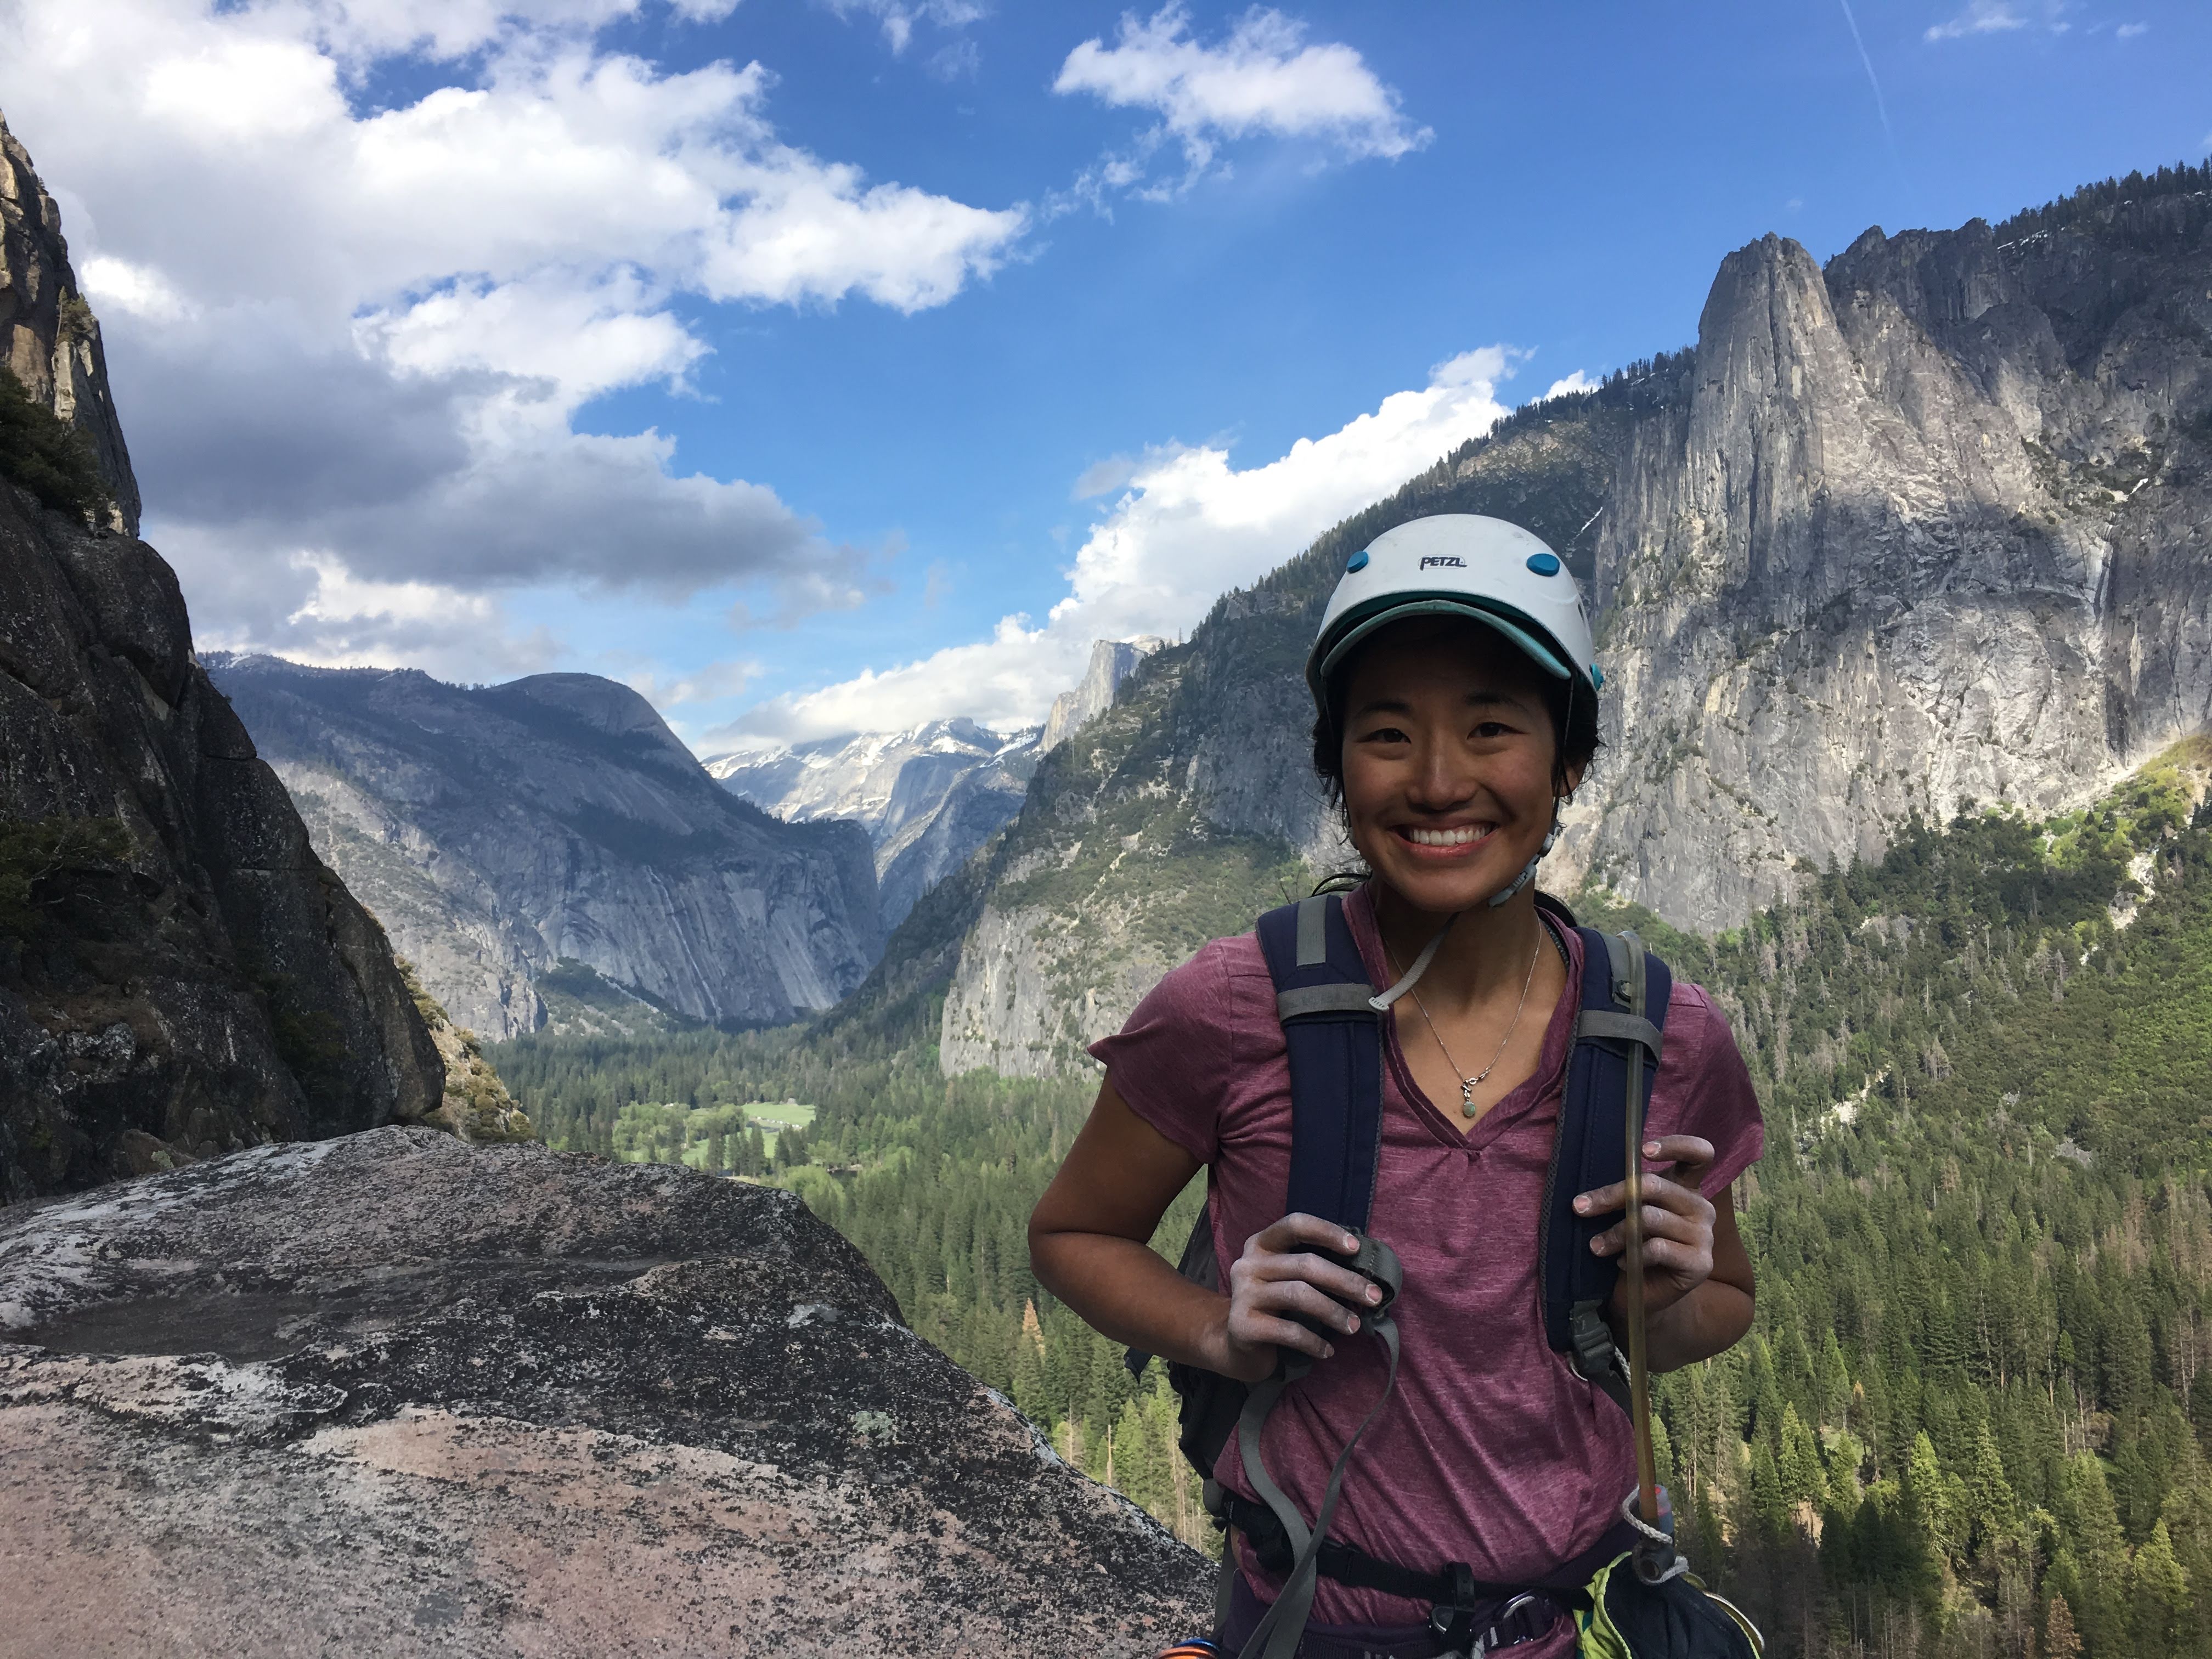 Our last day climbing at Yosemite, we climbed Nutcracker, a five pitch route which was originally climbed with only stoppers. We did it in six pitches, with cams.